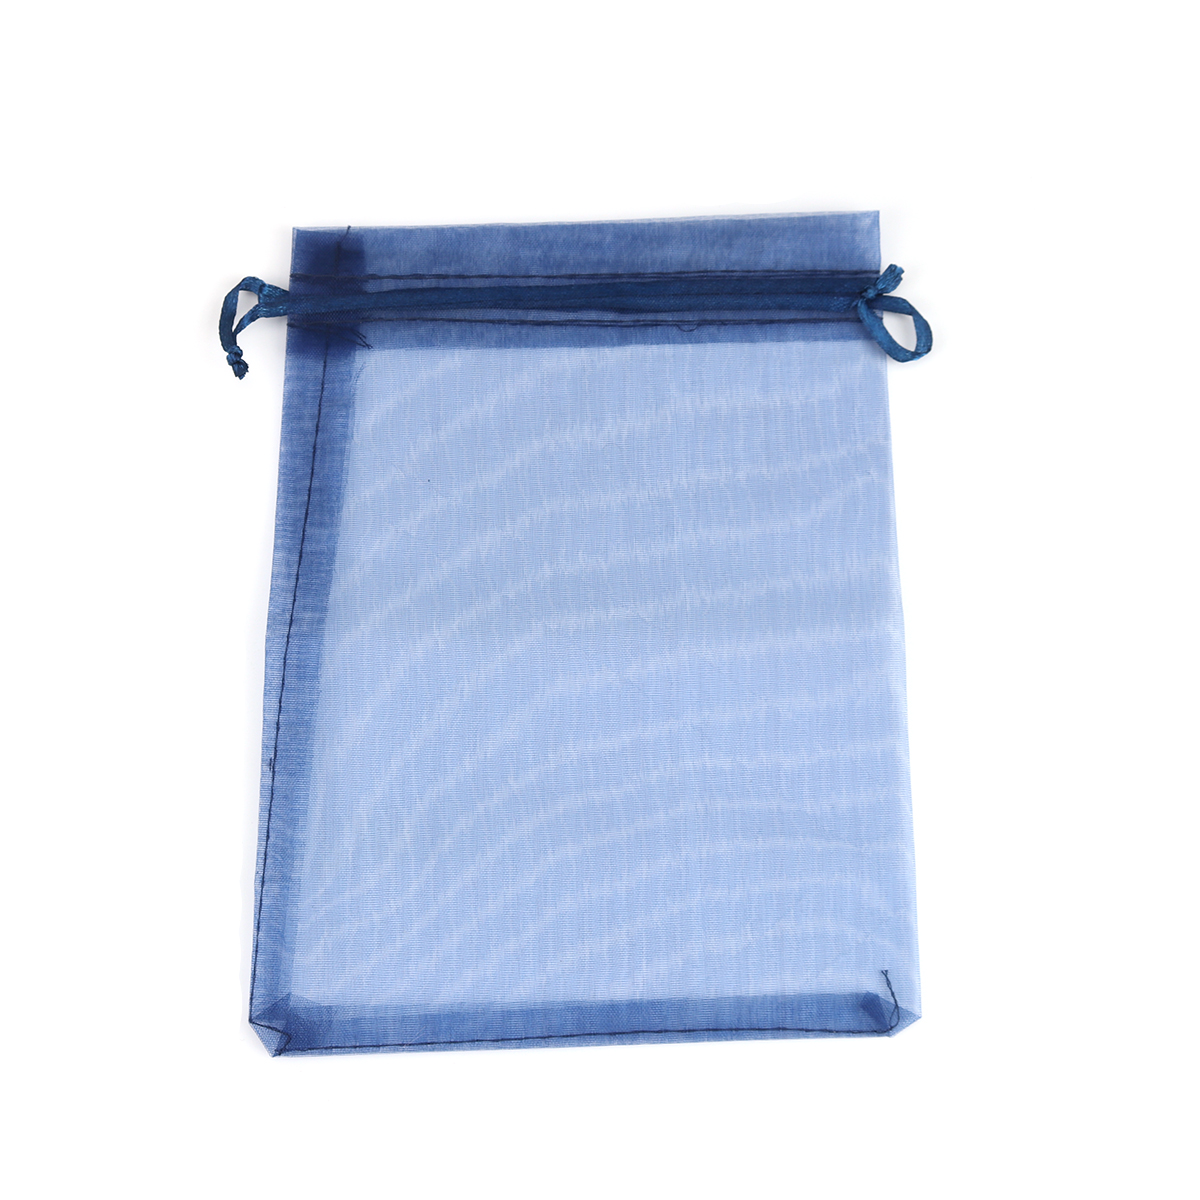 Picture of Wedding Gift Organza Jewelry Bags Drawstring Rectangle Navy Blue 20cm x15cm(7 7/8" x5 7/8"), (Usable Space: 17x14.5cm) 20 PCs